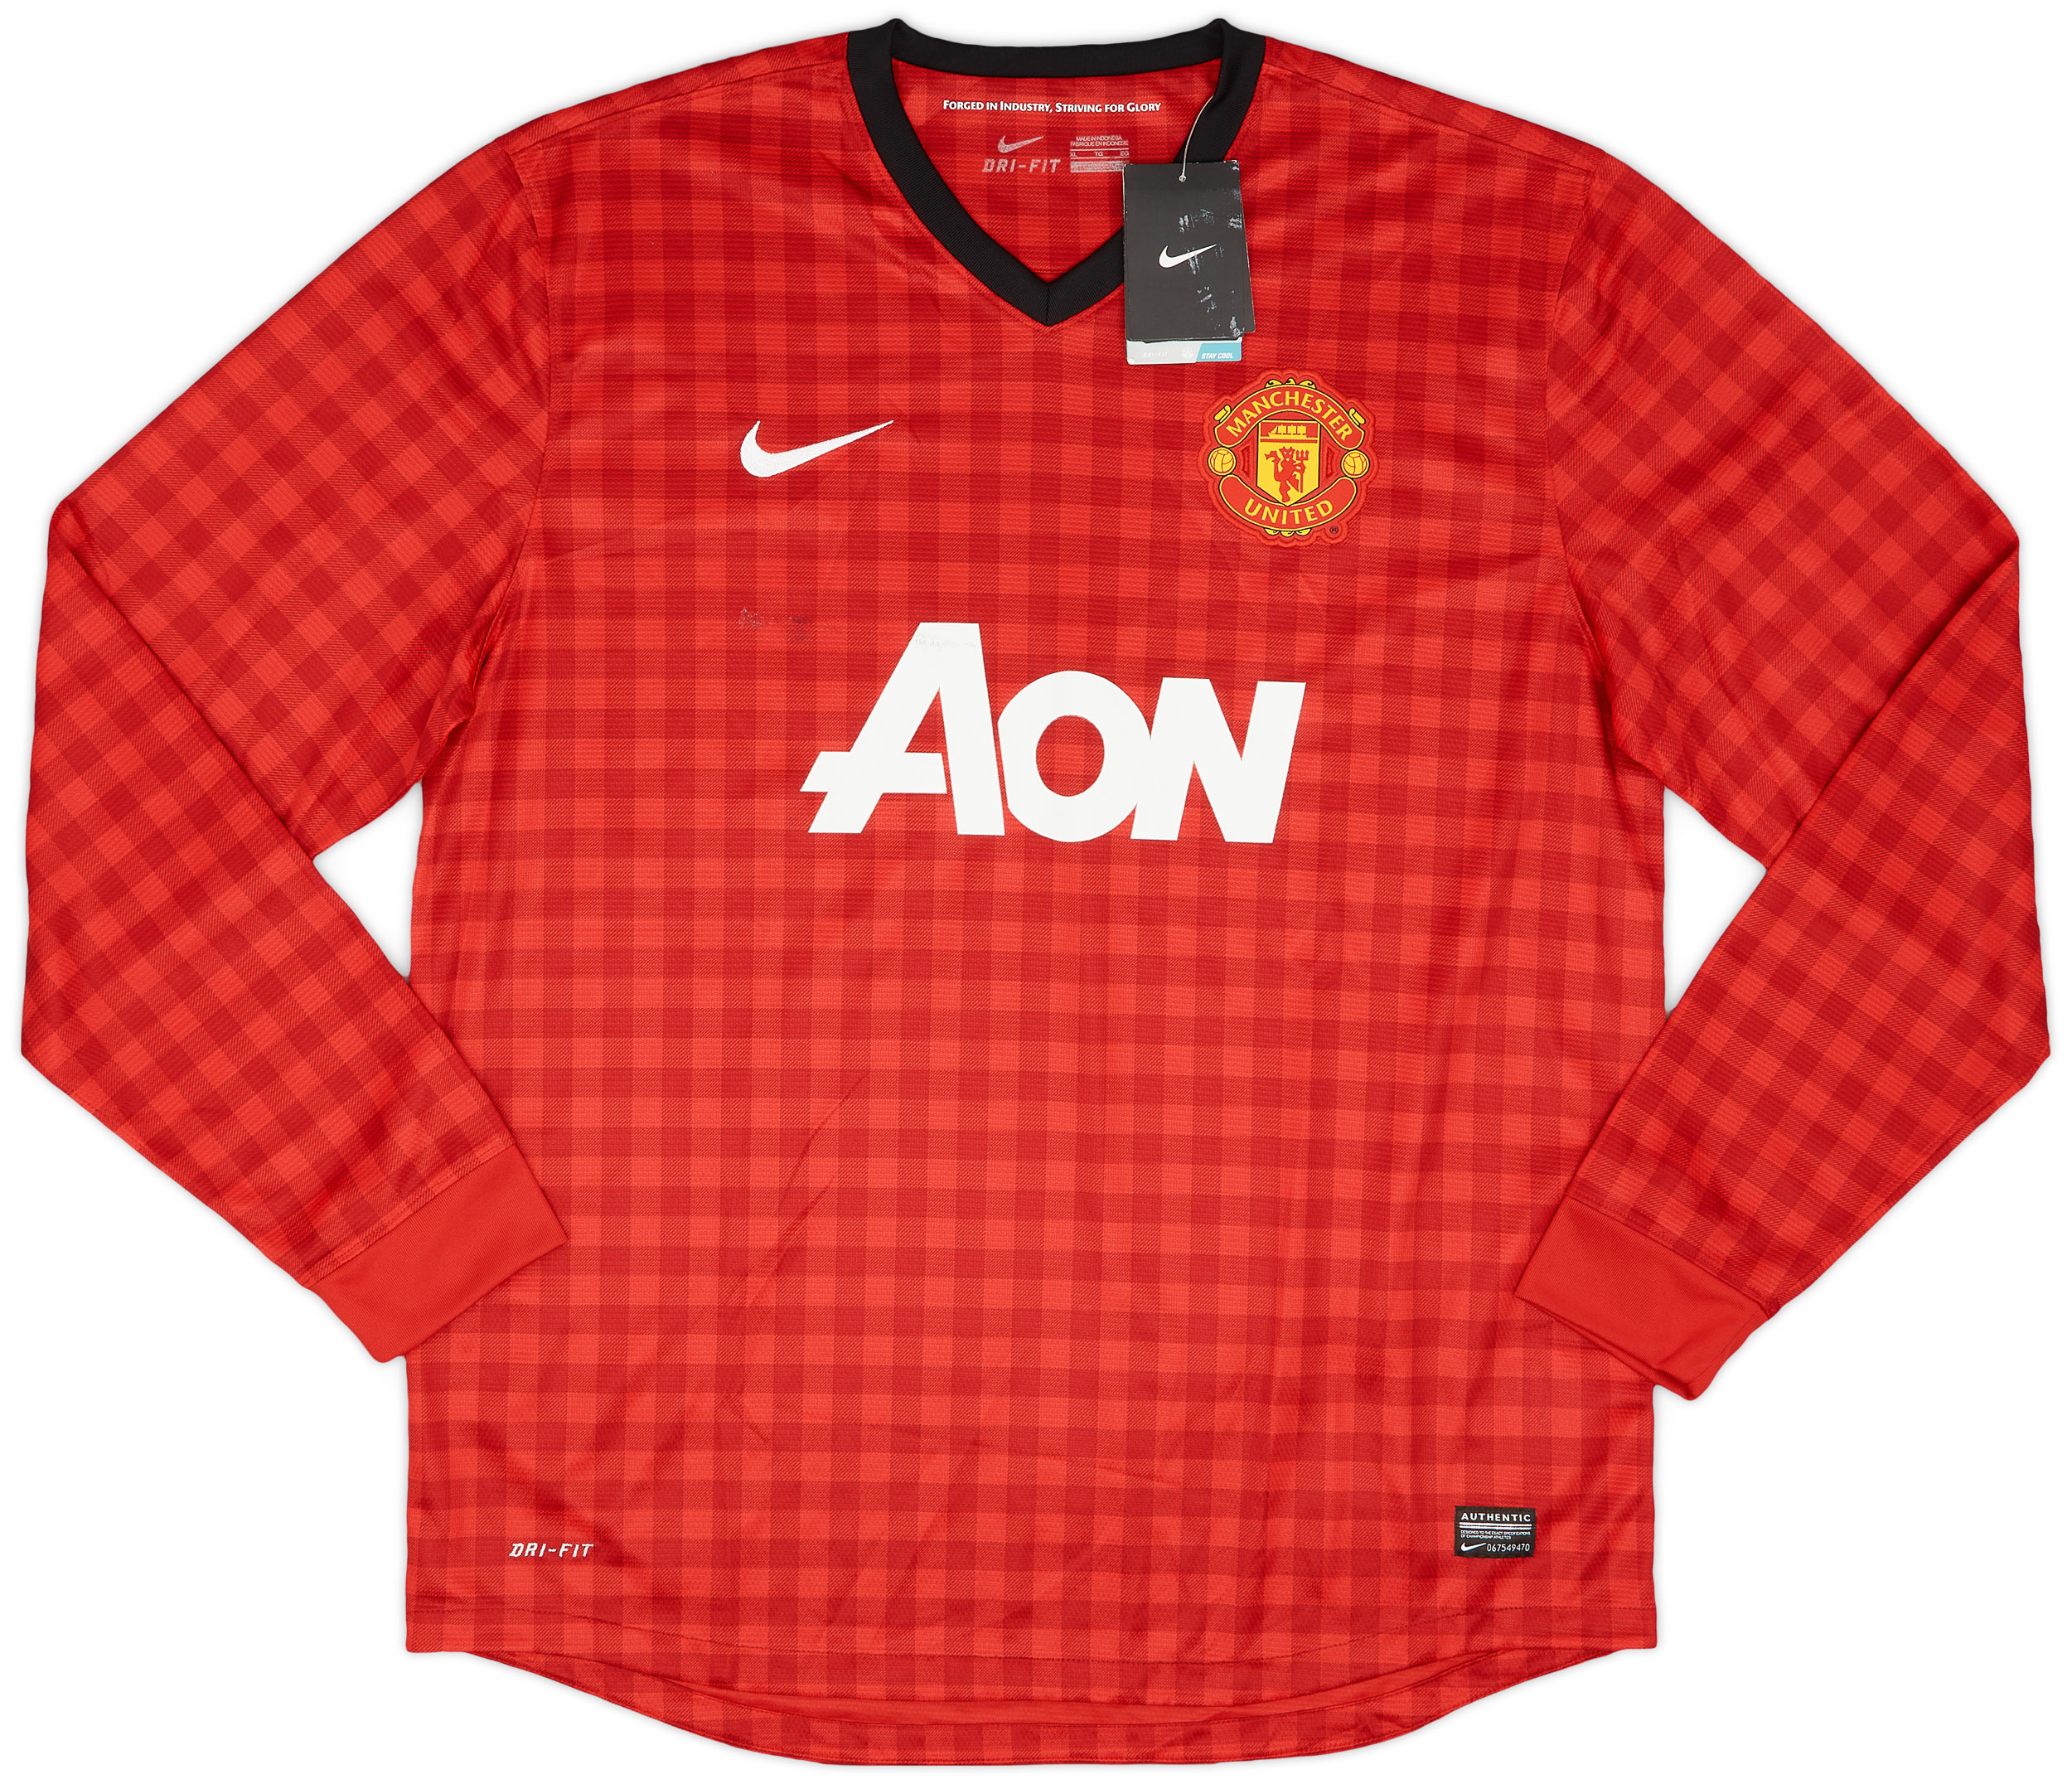 2012-13 Manchester United Home Shirt ()